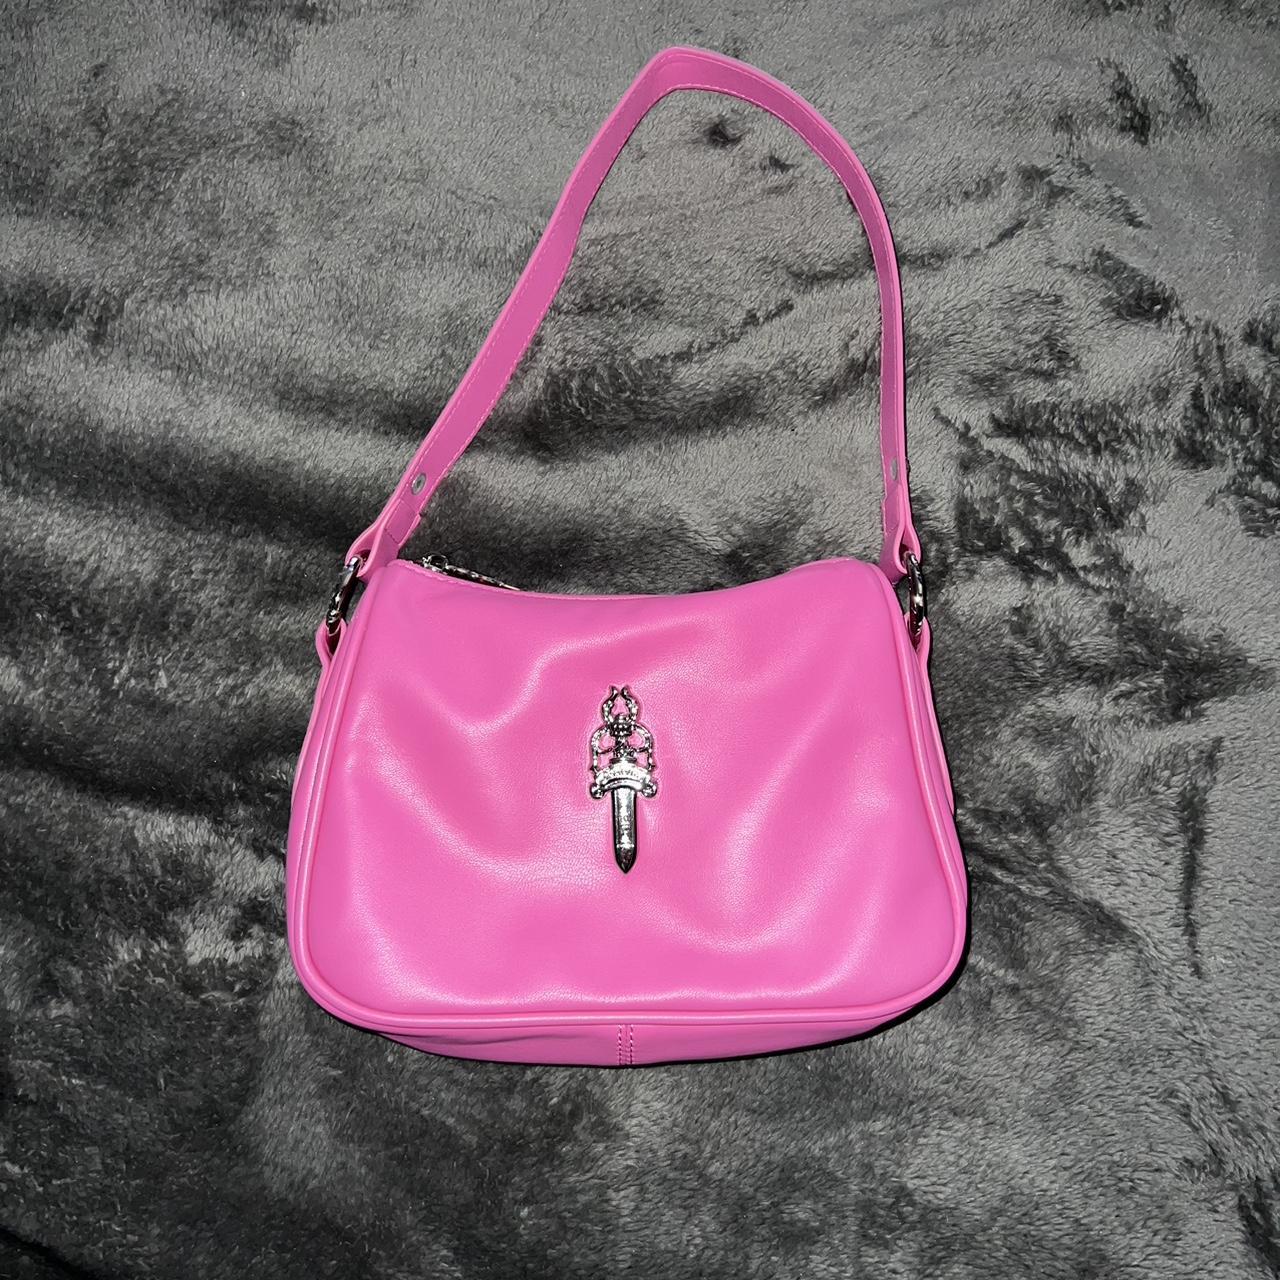 Women's Pink and Silver Bag